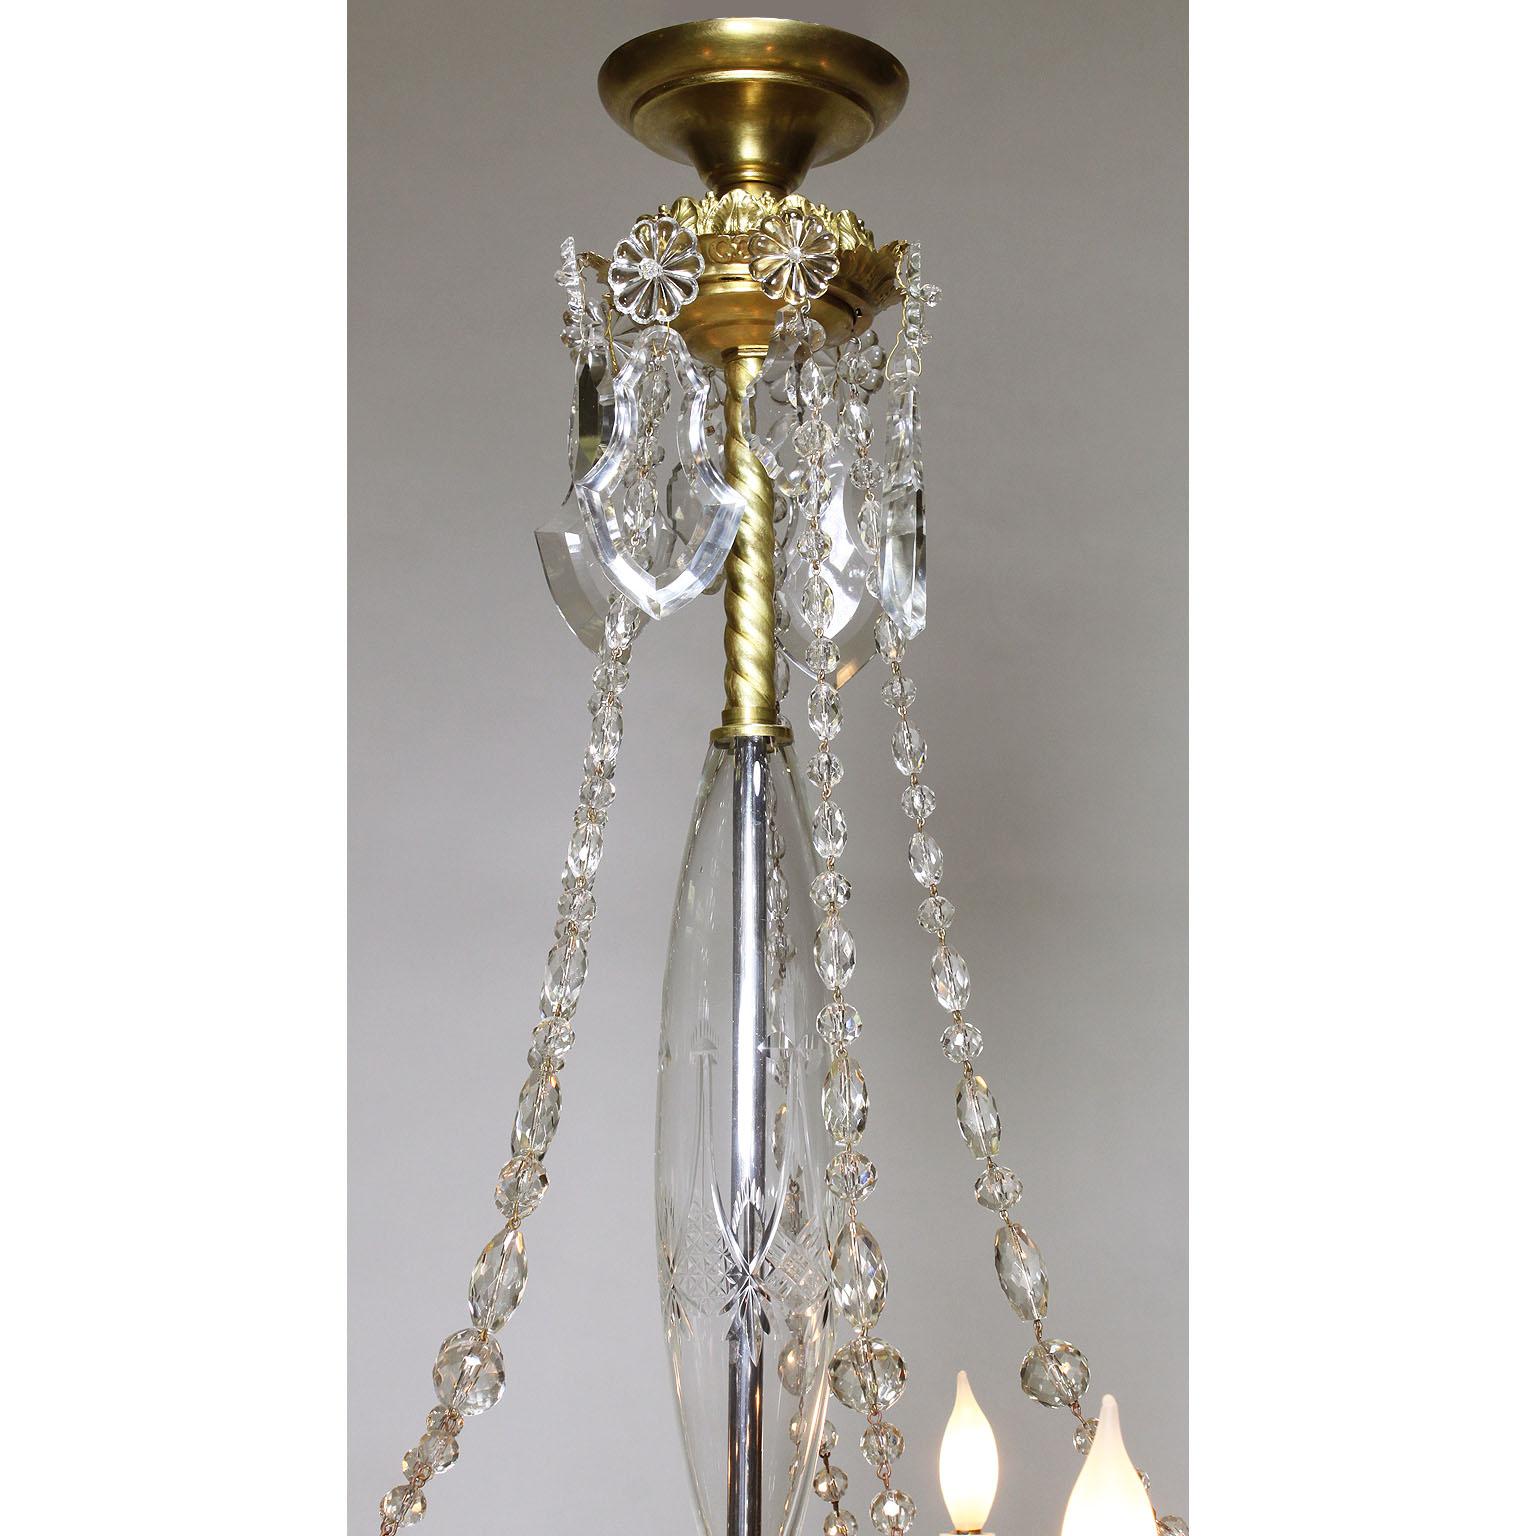 Cut Glass French 19th Century Neoclassical Revival Style Gilt-Metal & Cut-Glass Chandelier For Sale